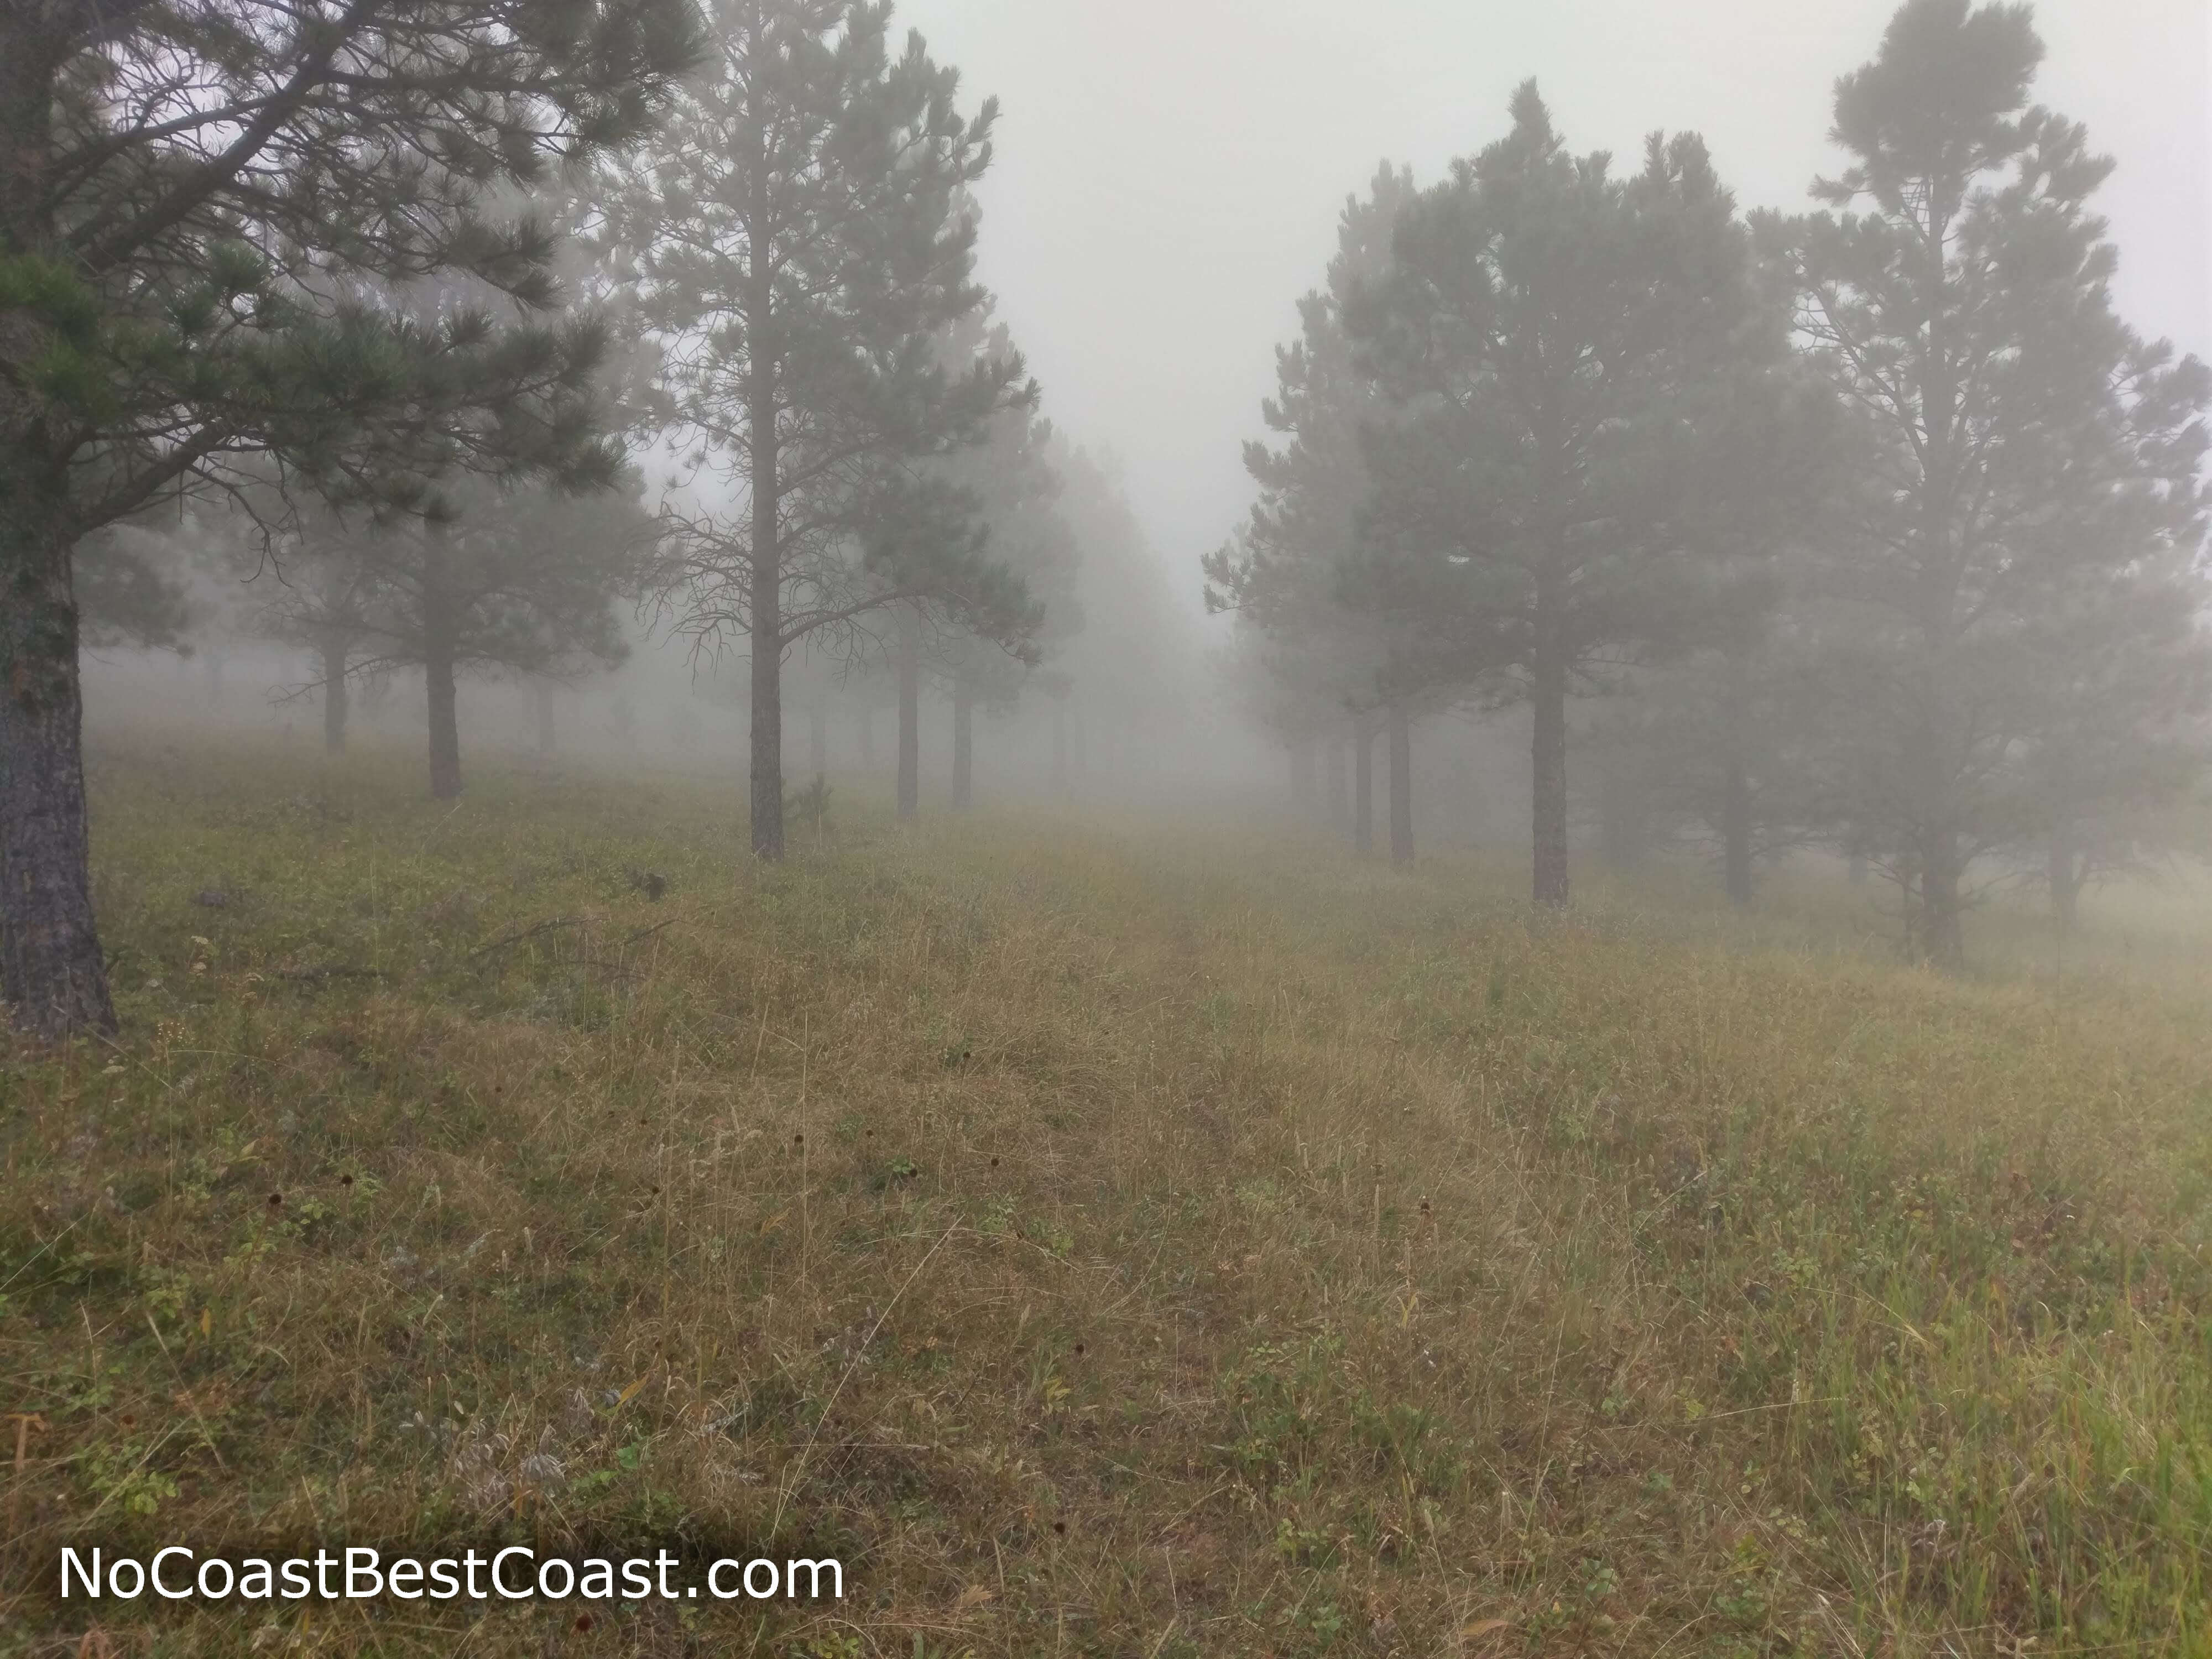 Pine trees planted in rows near the peak are especially creepy in the fog